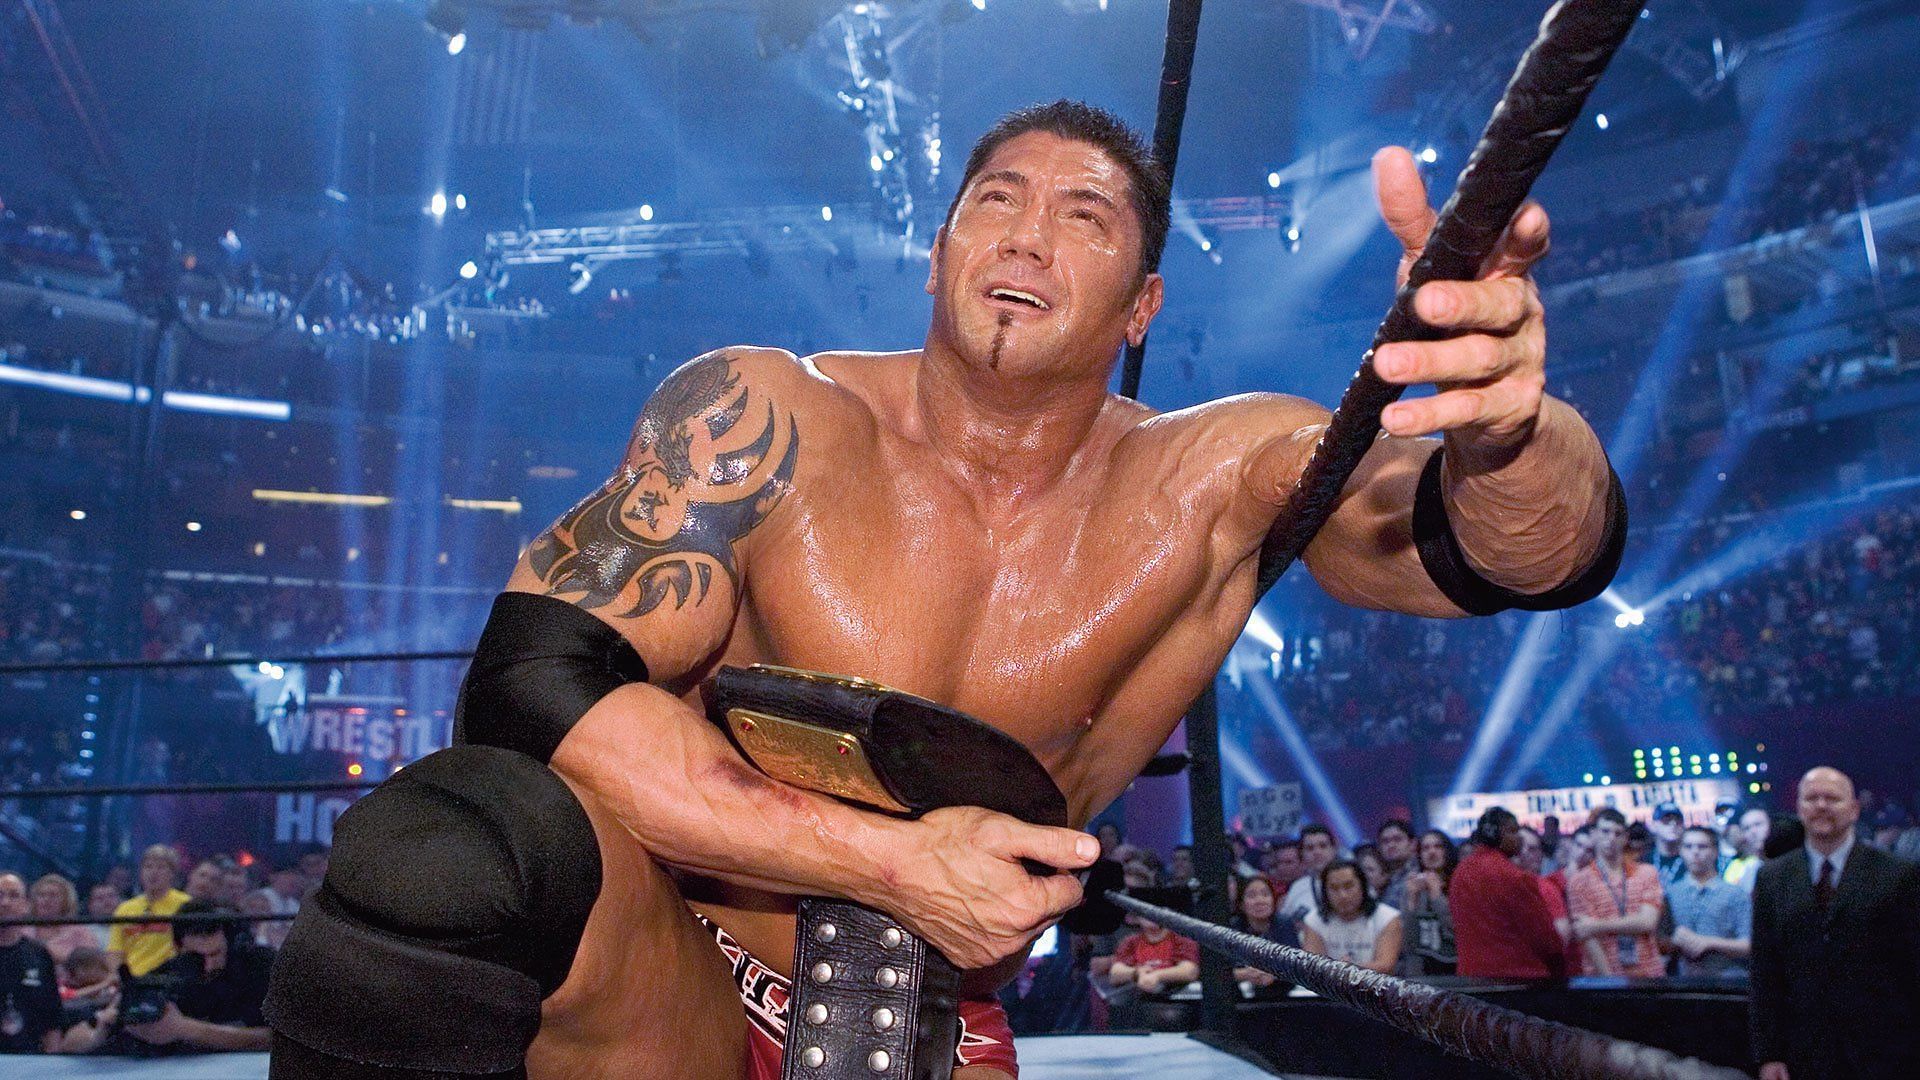 After winning Royal Rumble, Batista captured the world title at WrestleMania